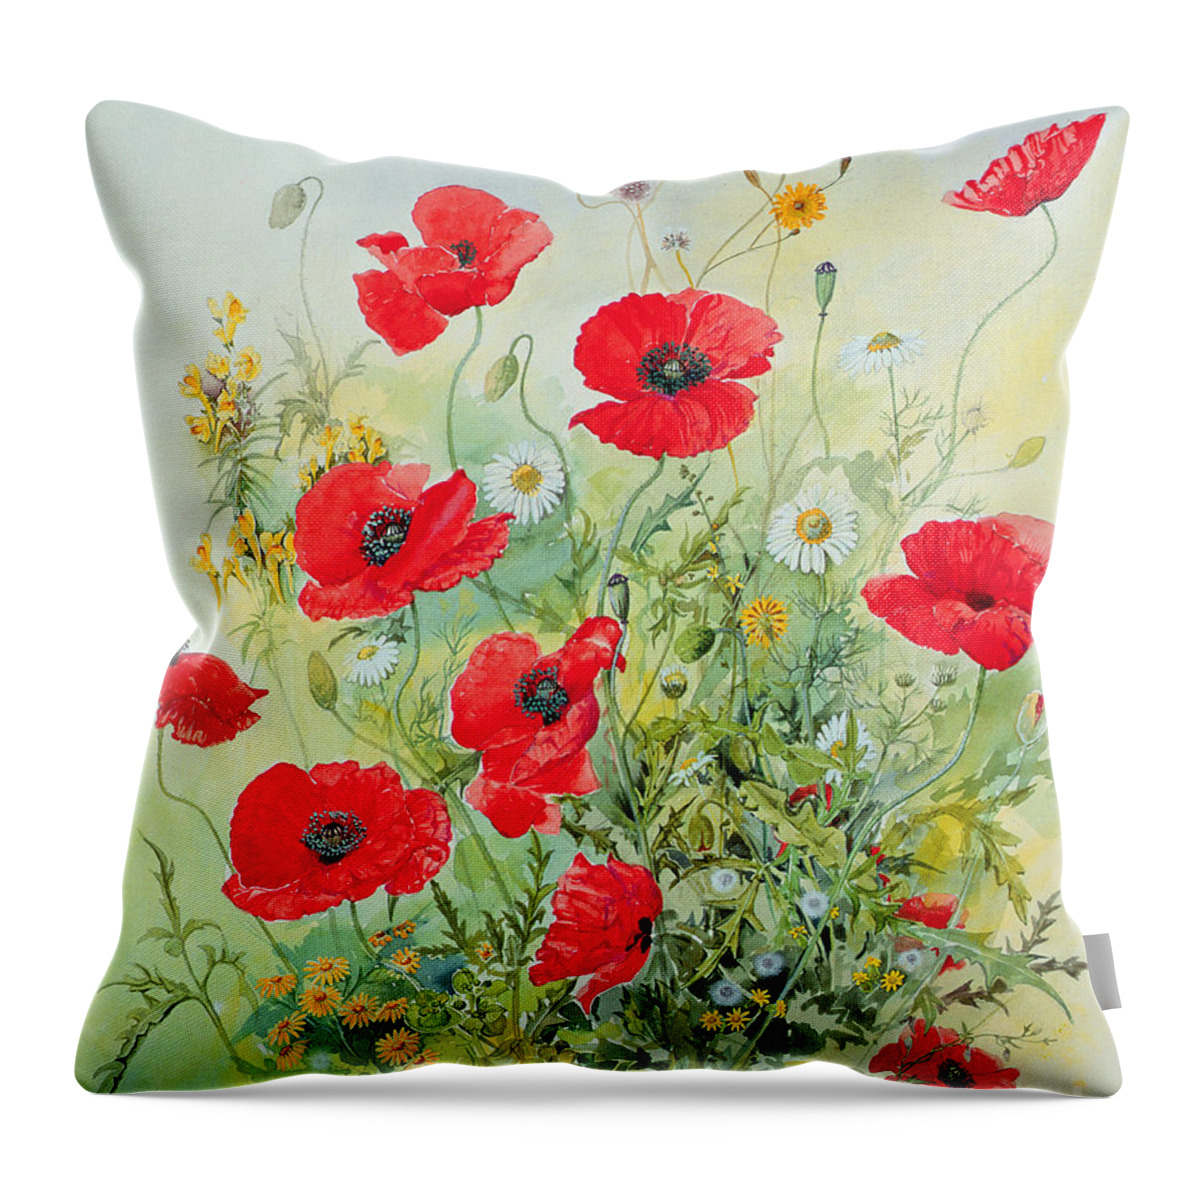 #faatoppicks Throw Pillow featuring the painting Poppies and Mayweed by John Gubbins